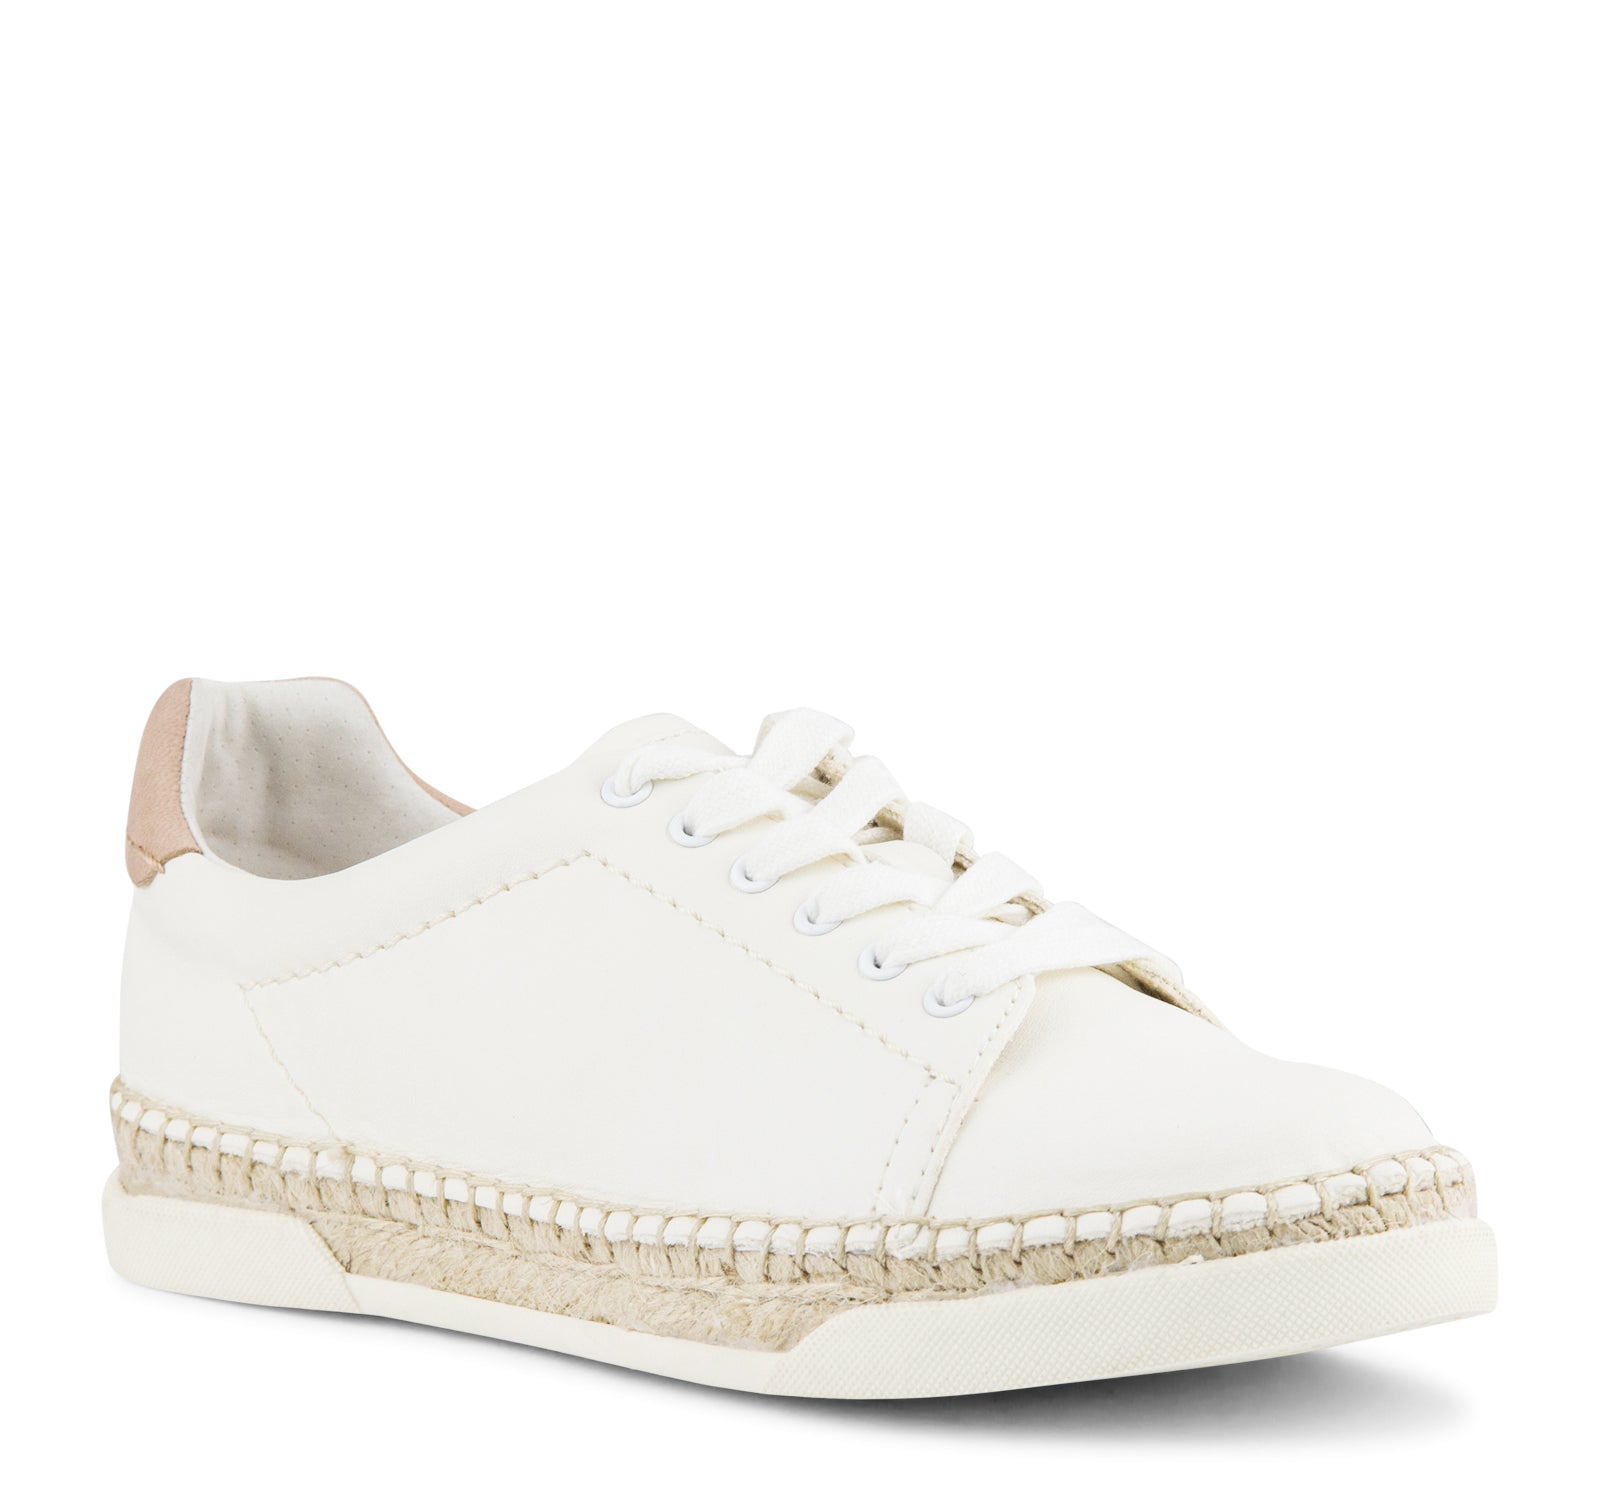 Dolce Vita Madox Sneaker– On The EDGE